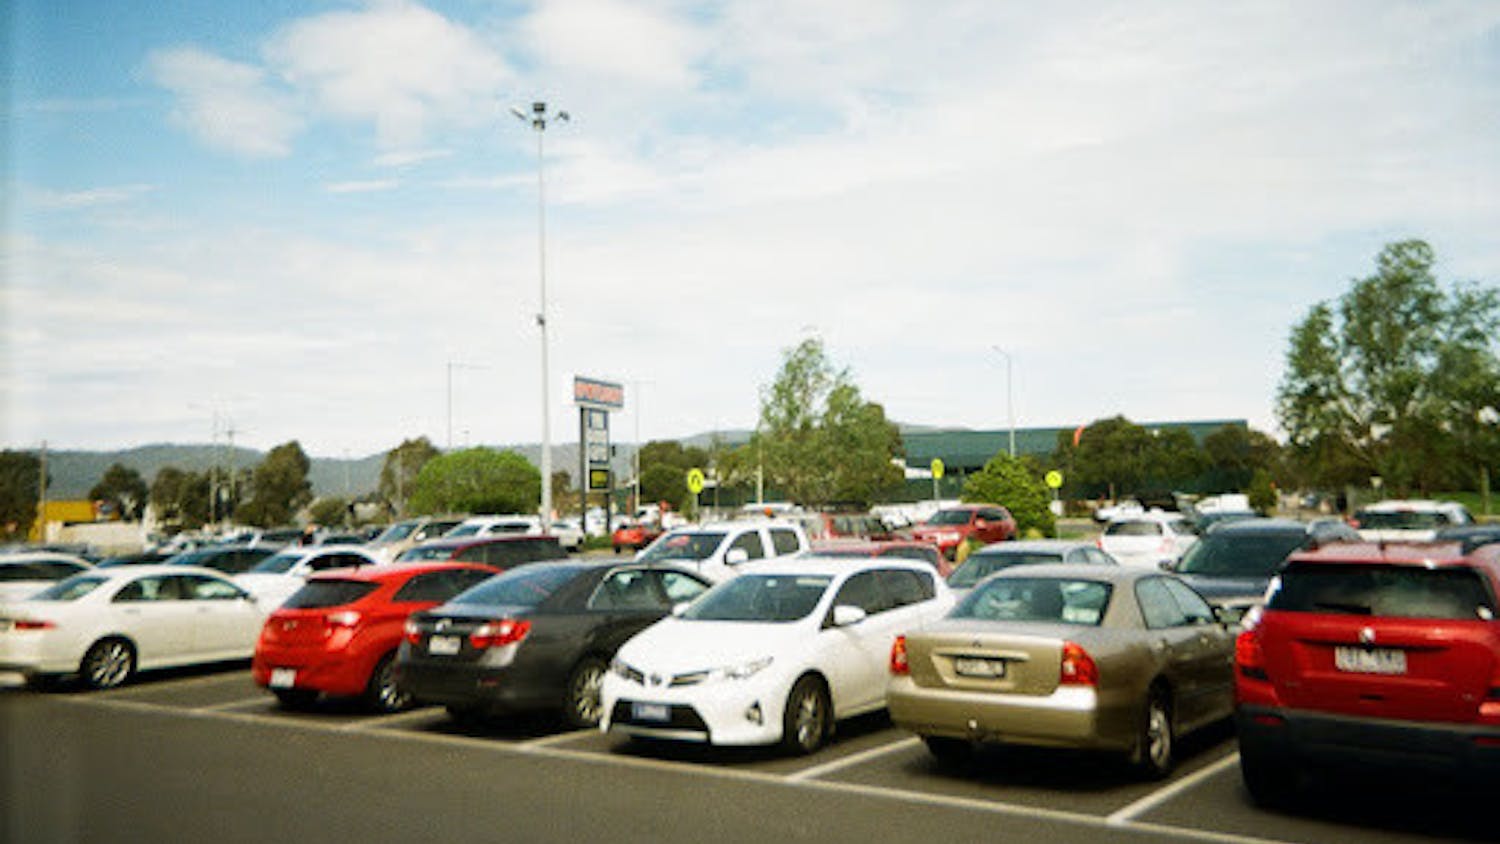 Commuters often need to devote extra time to driving and finding a parking space. (Photo courtesy of Flickr / “2018 Parking Lot” by Matthew Paul Argall / October 30, 2018).